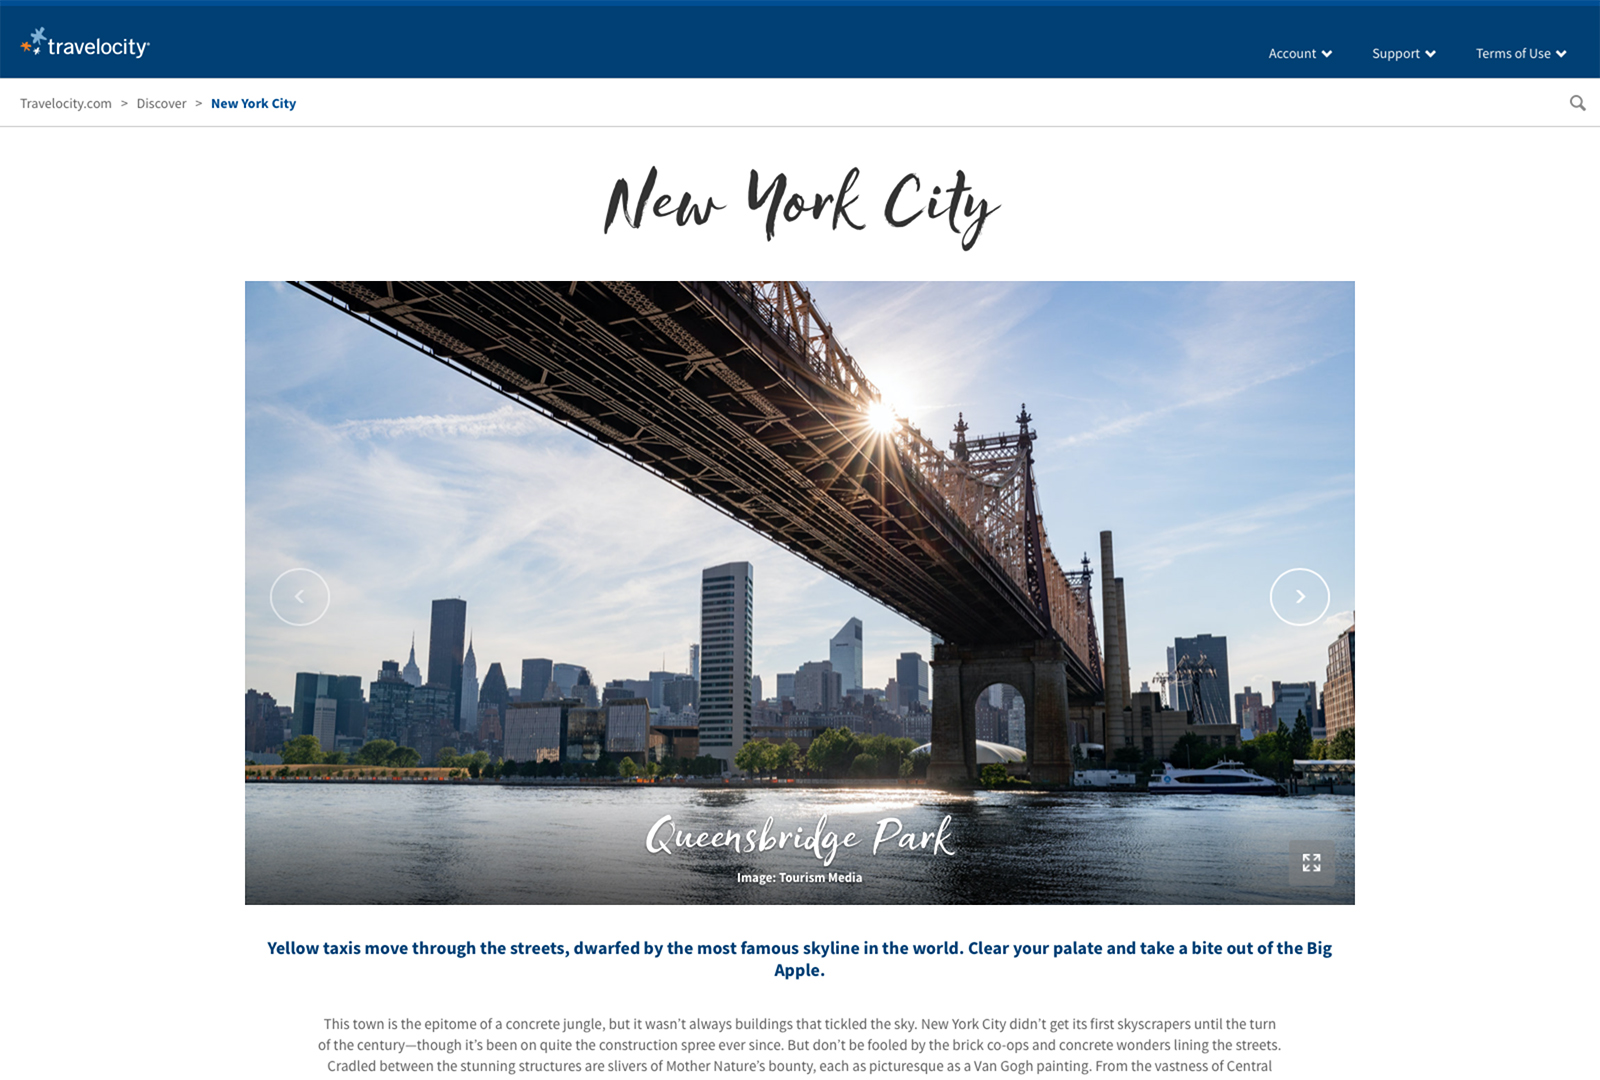 Travelocity Theme Pages | Case Study | Tourism Media